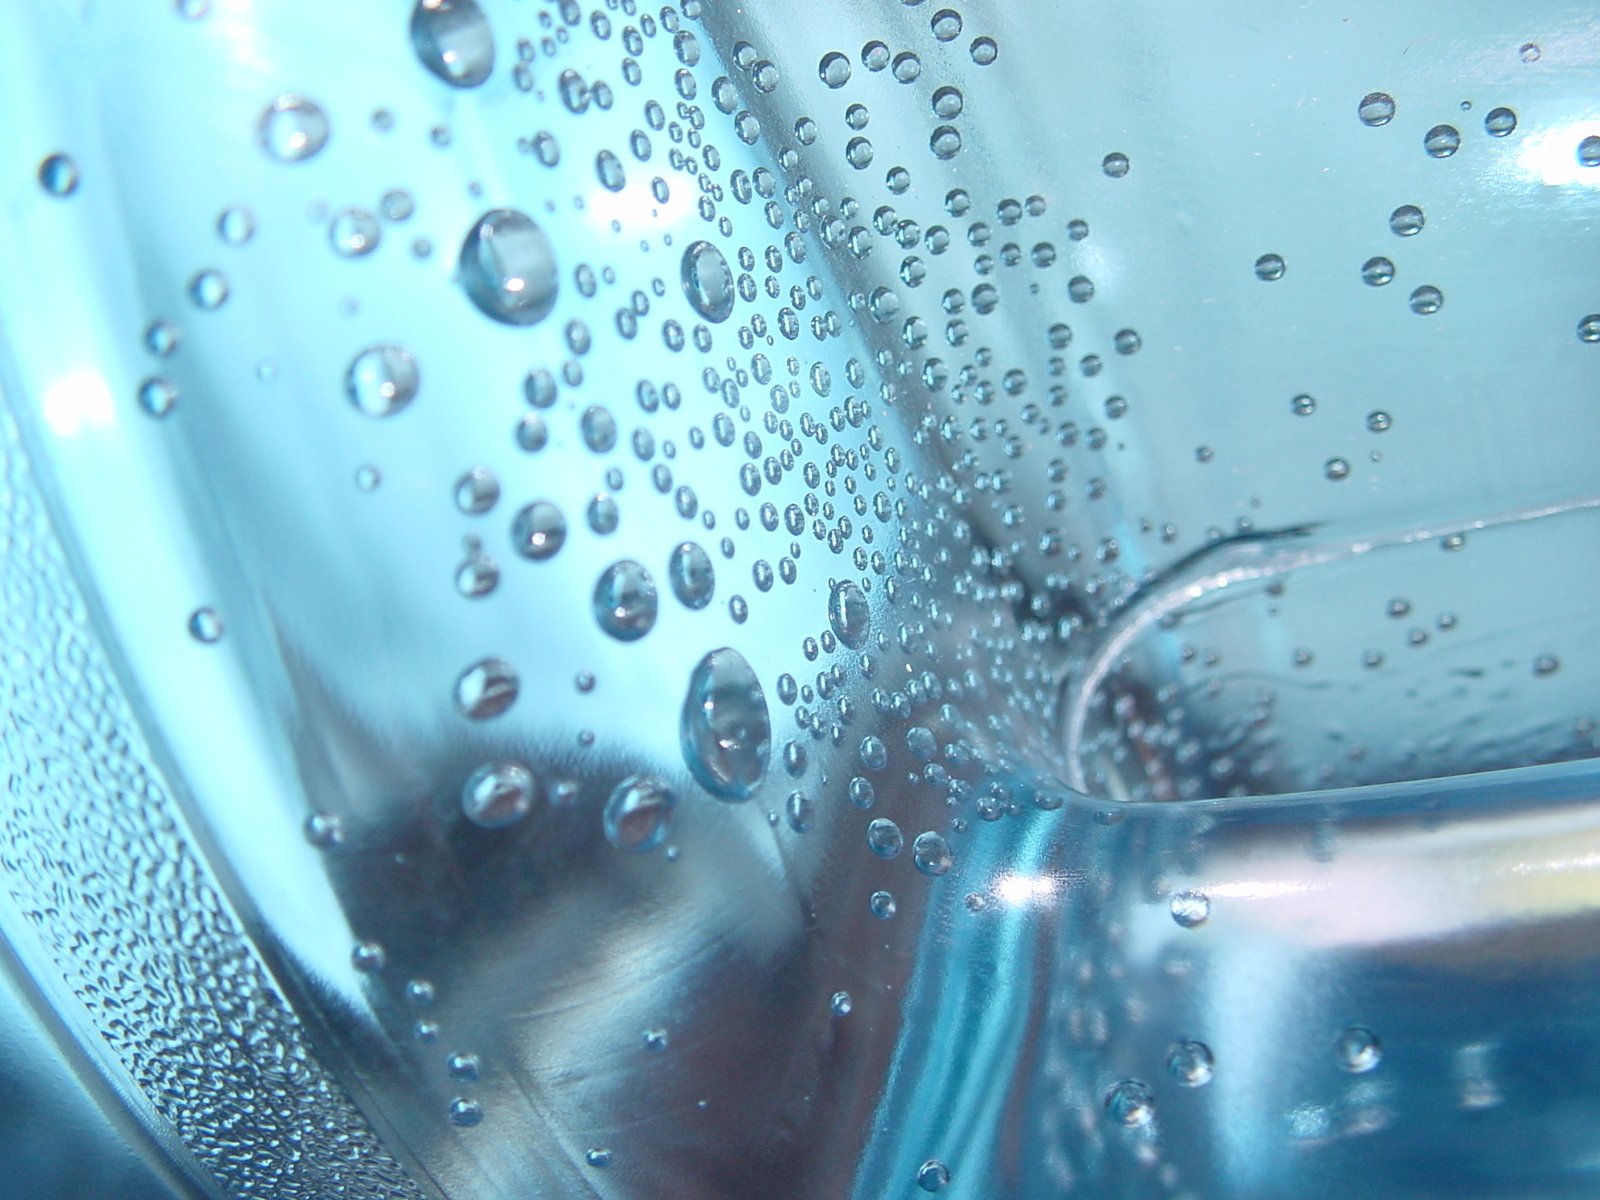 the bubbles are coming out of a large, glass bottle